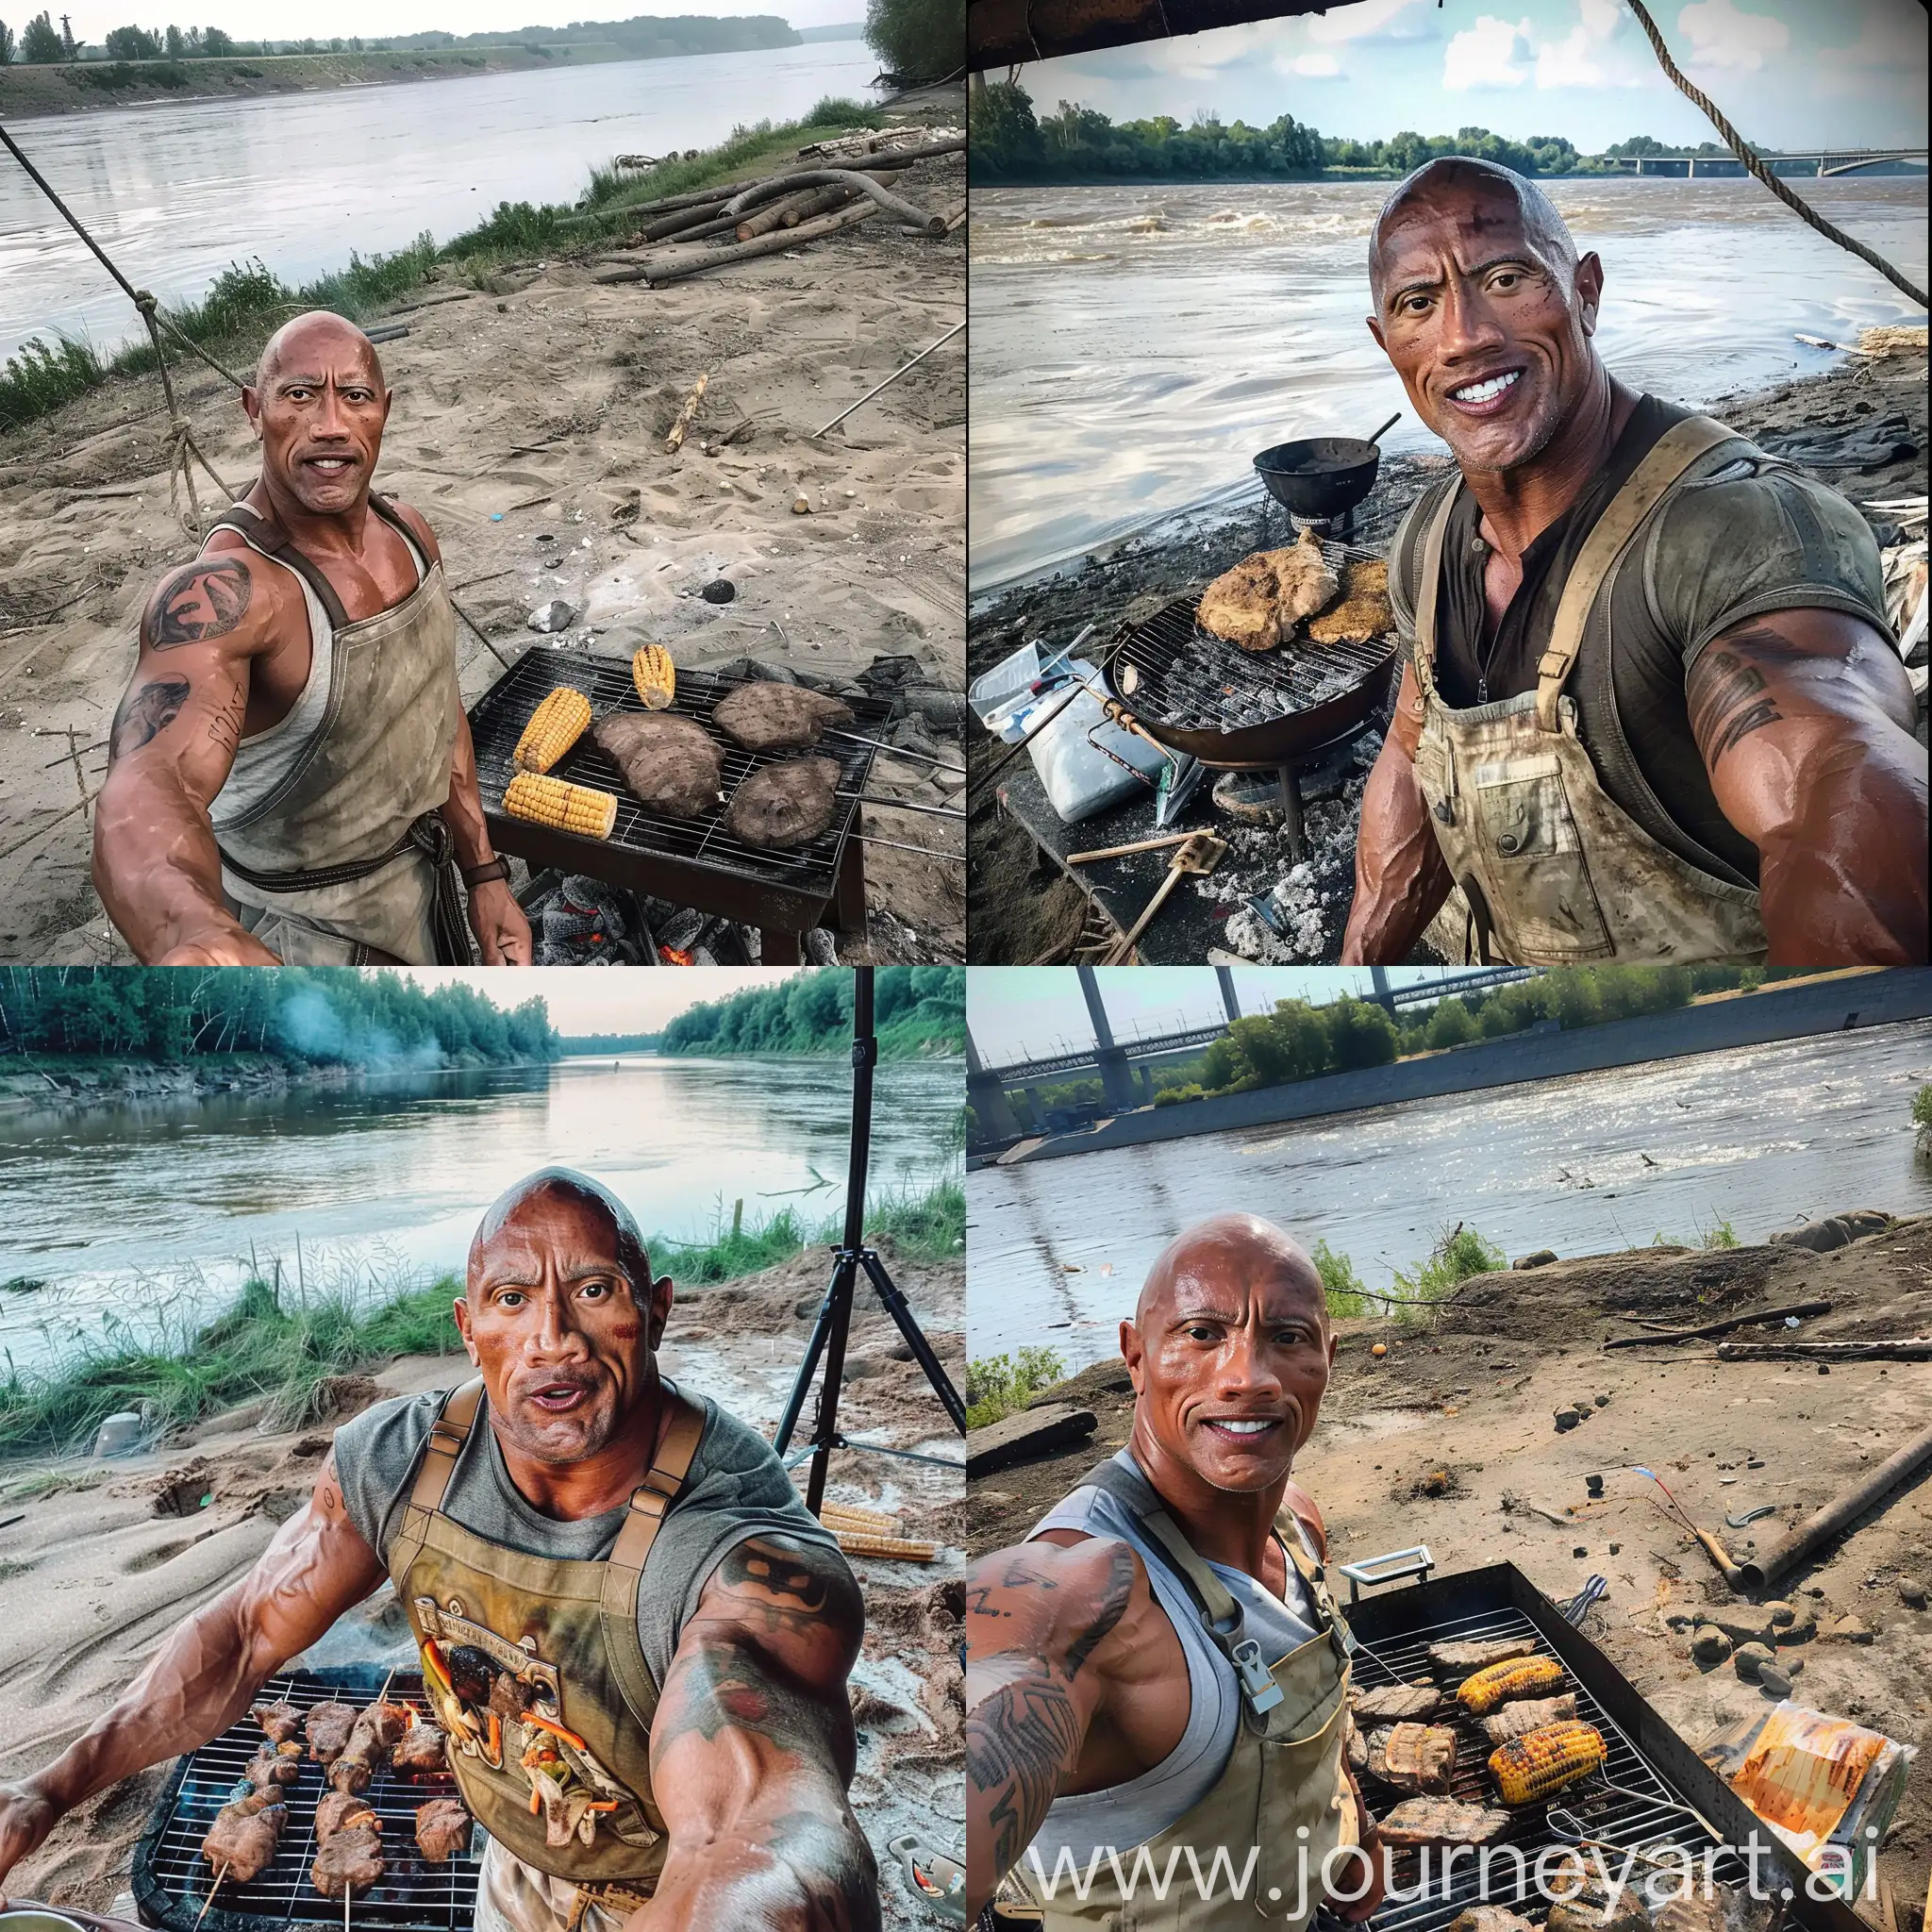 Dwayne-Johnson-Taking-a-Selfie-at-a-Barbecue-on-a-Dirty-Russian-River-Beach